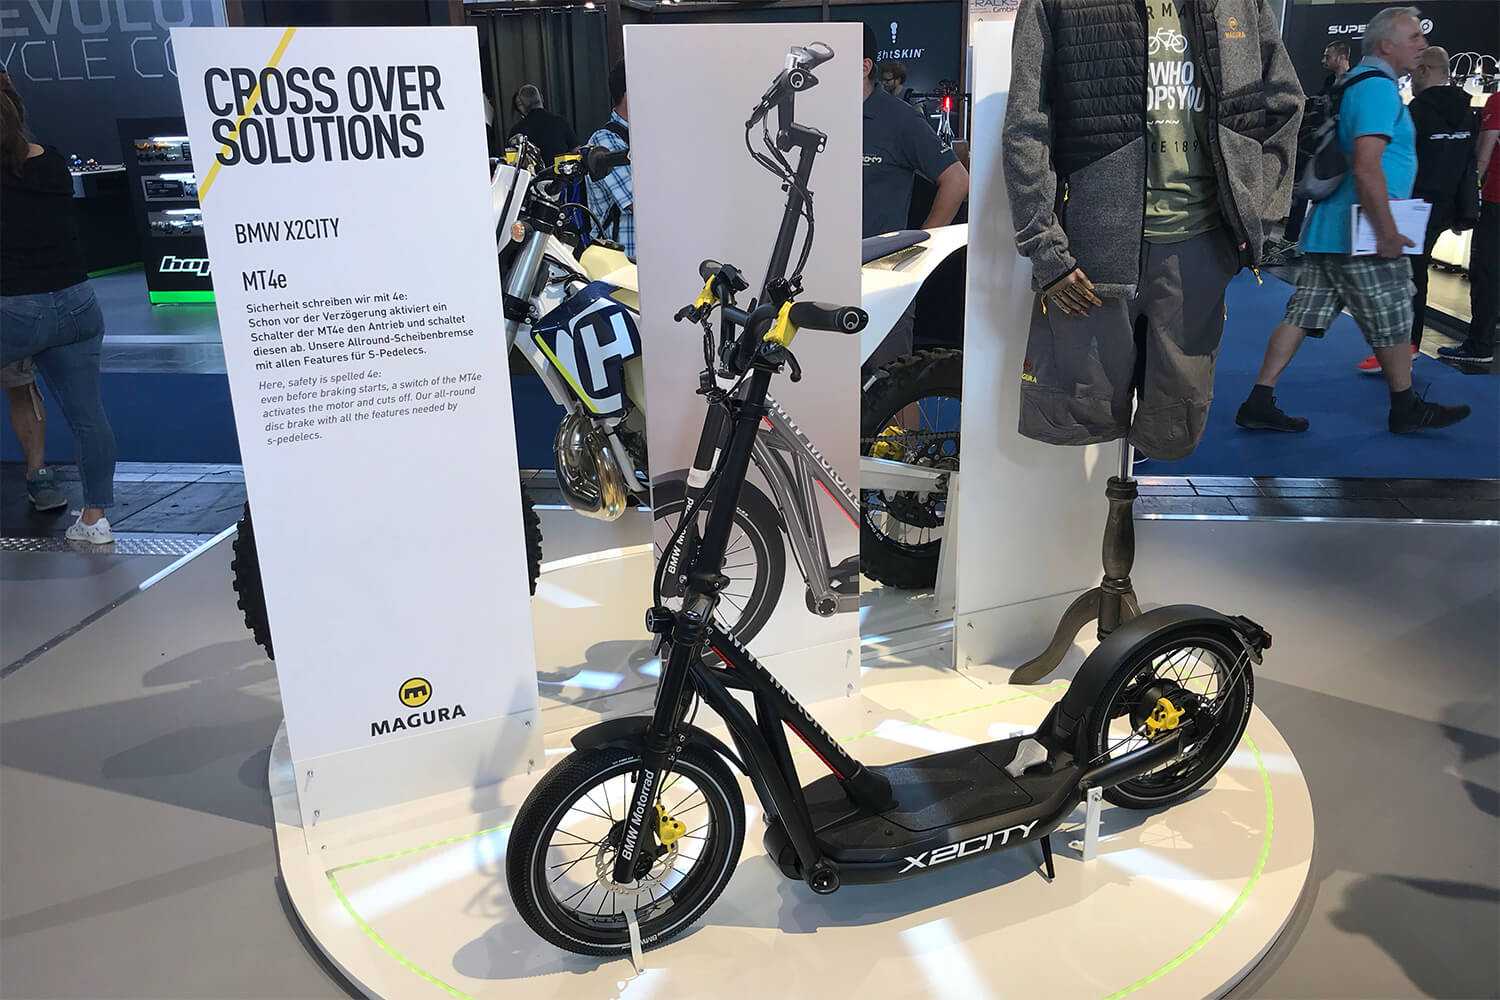 BMW X2City electric scooter